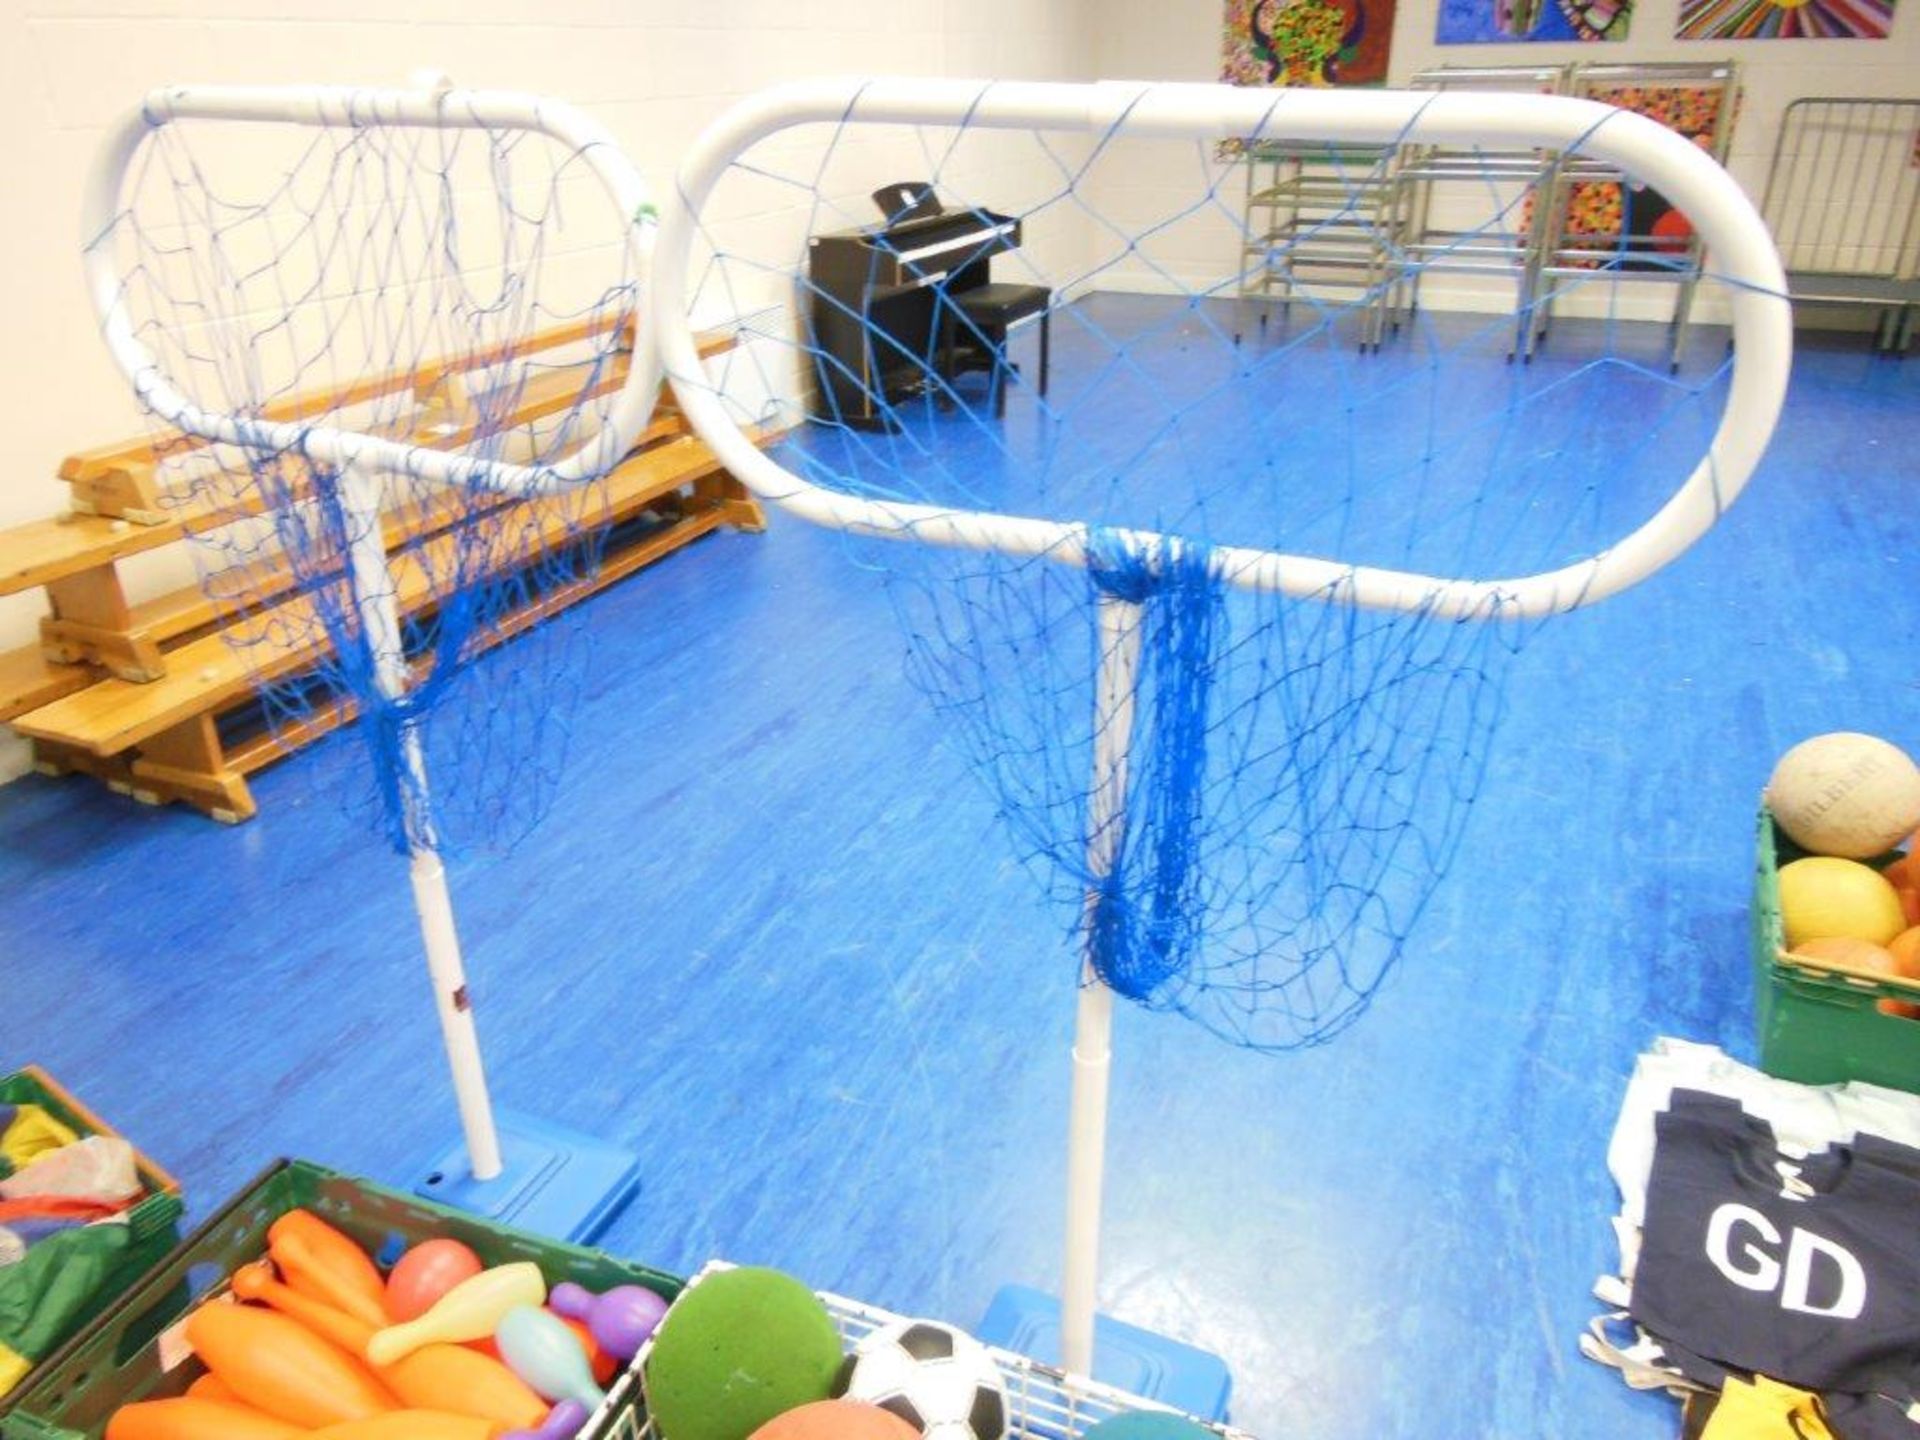 Large quantity of playground equipment including bean bags, nets, balls, hoola hoops, Frisbees, - Image 2 of 3